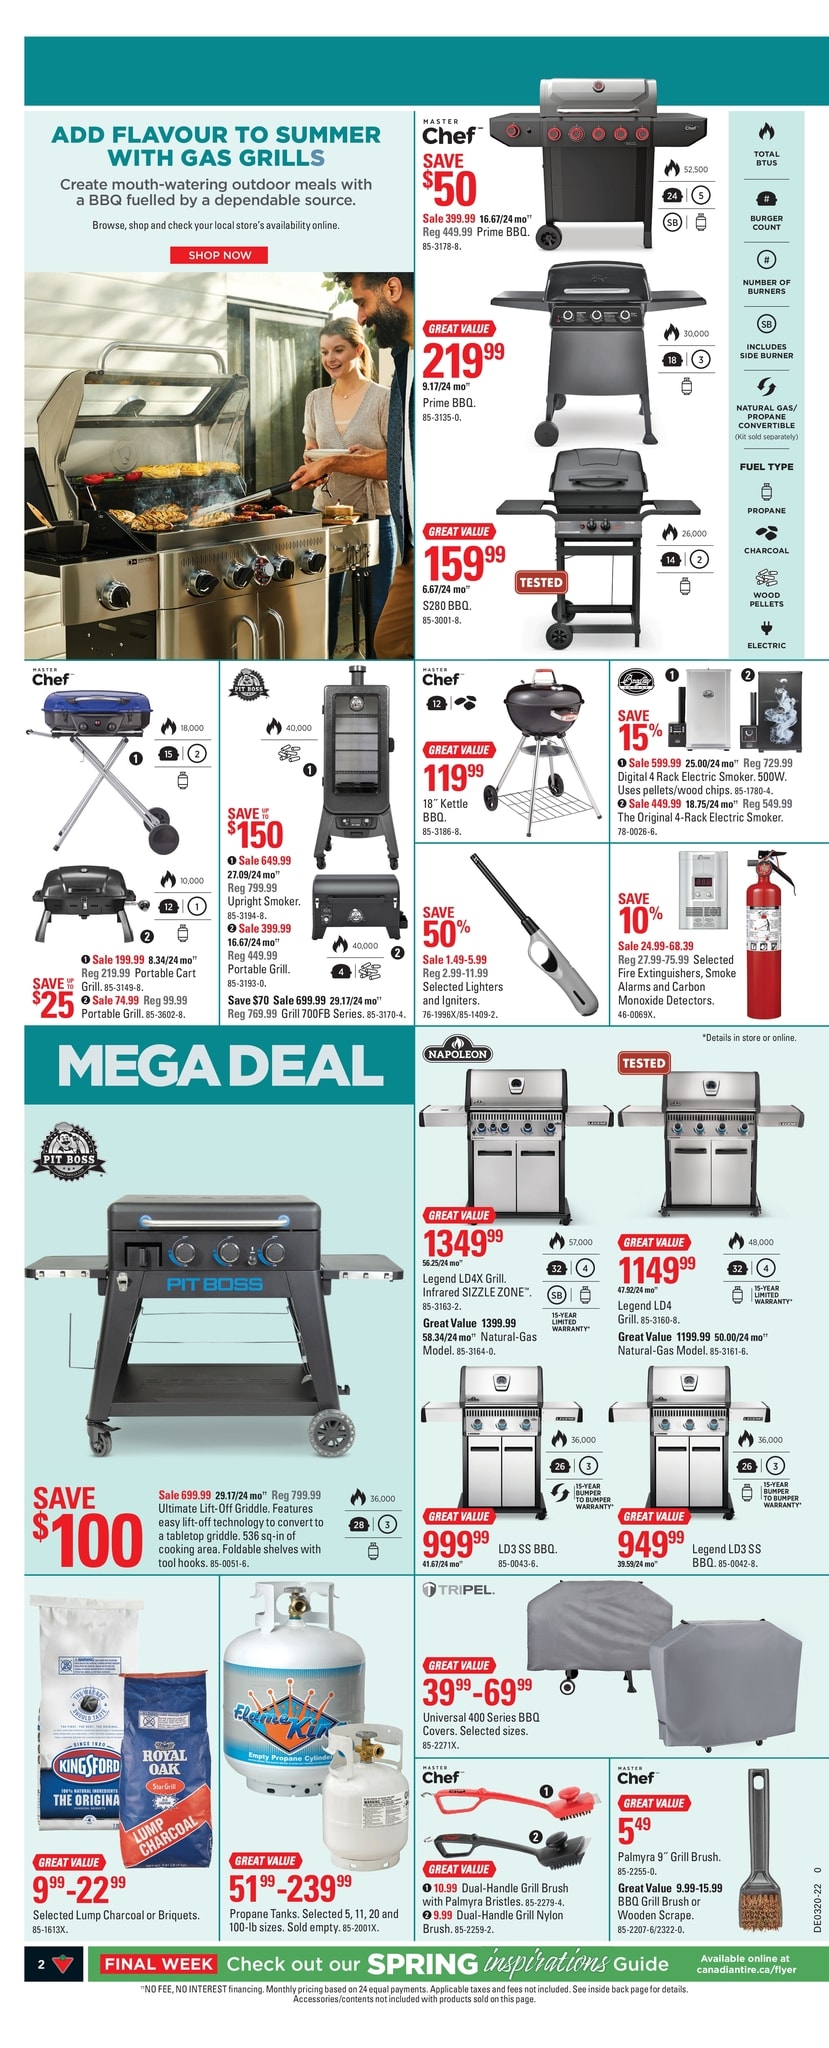 Canadian Tire - Weekly Flyer Specials - Page 2